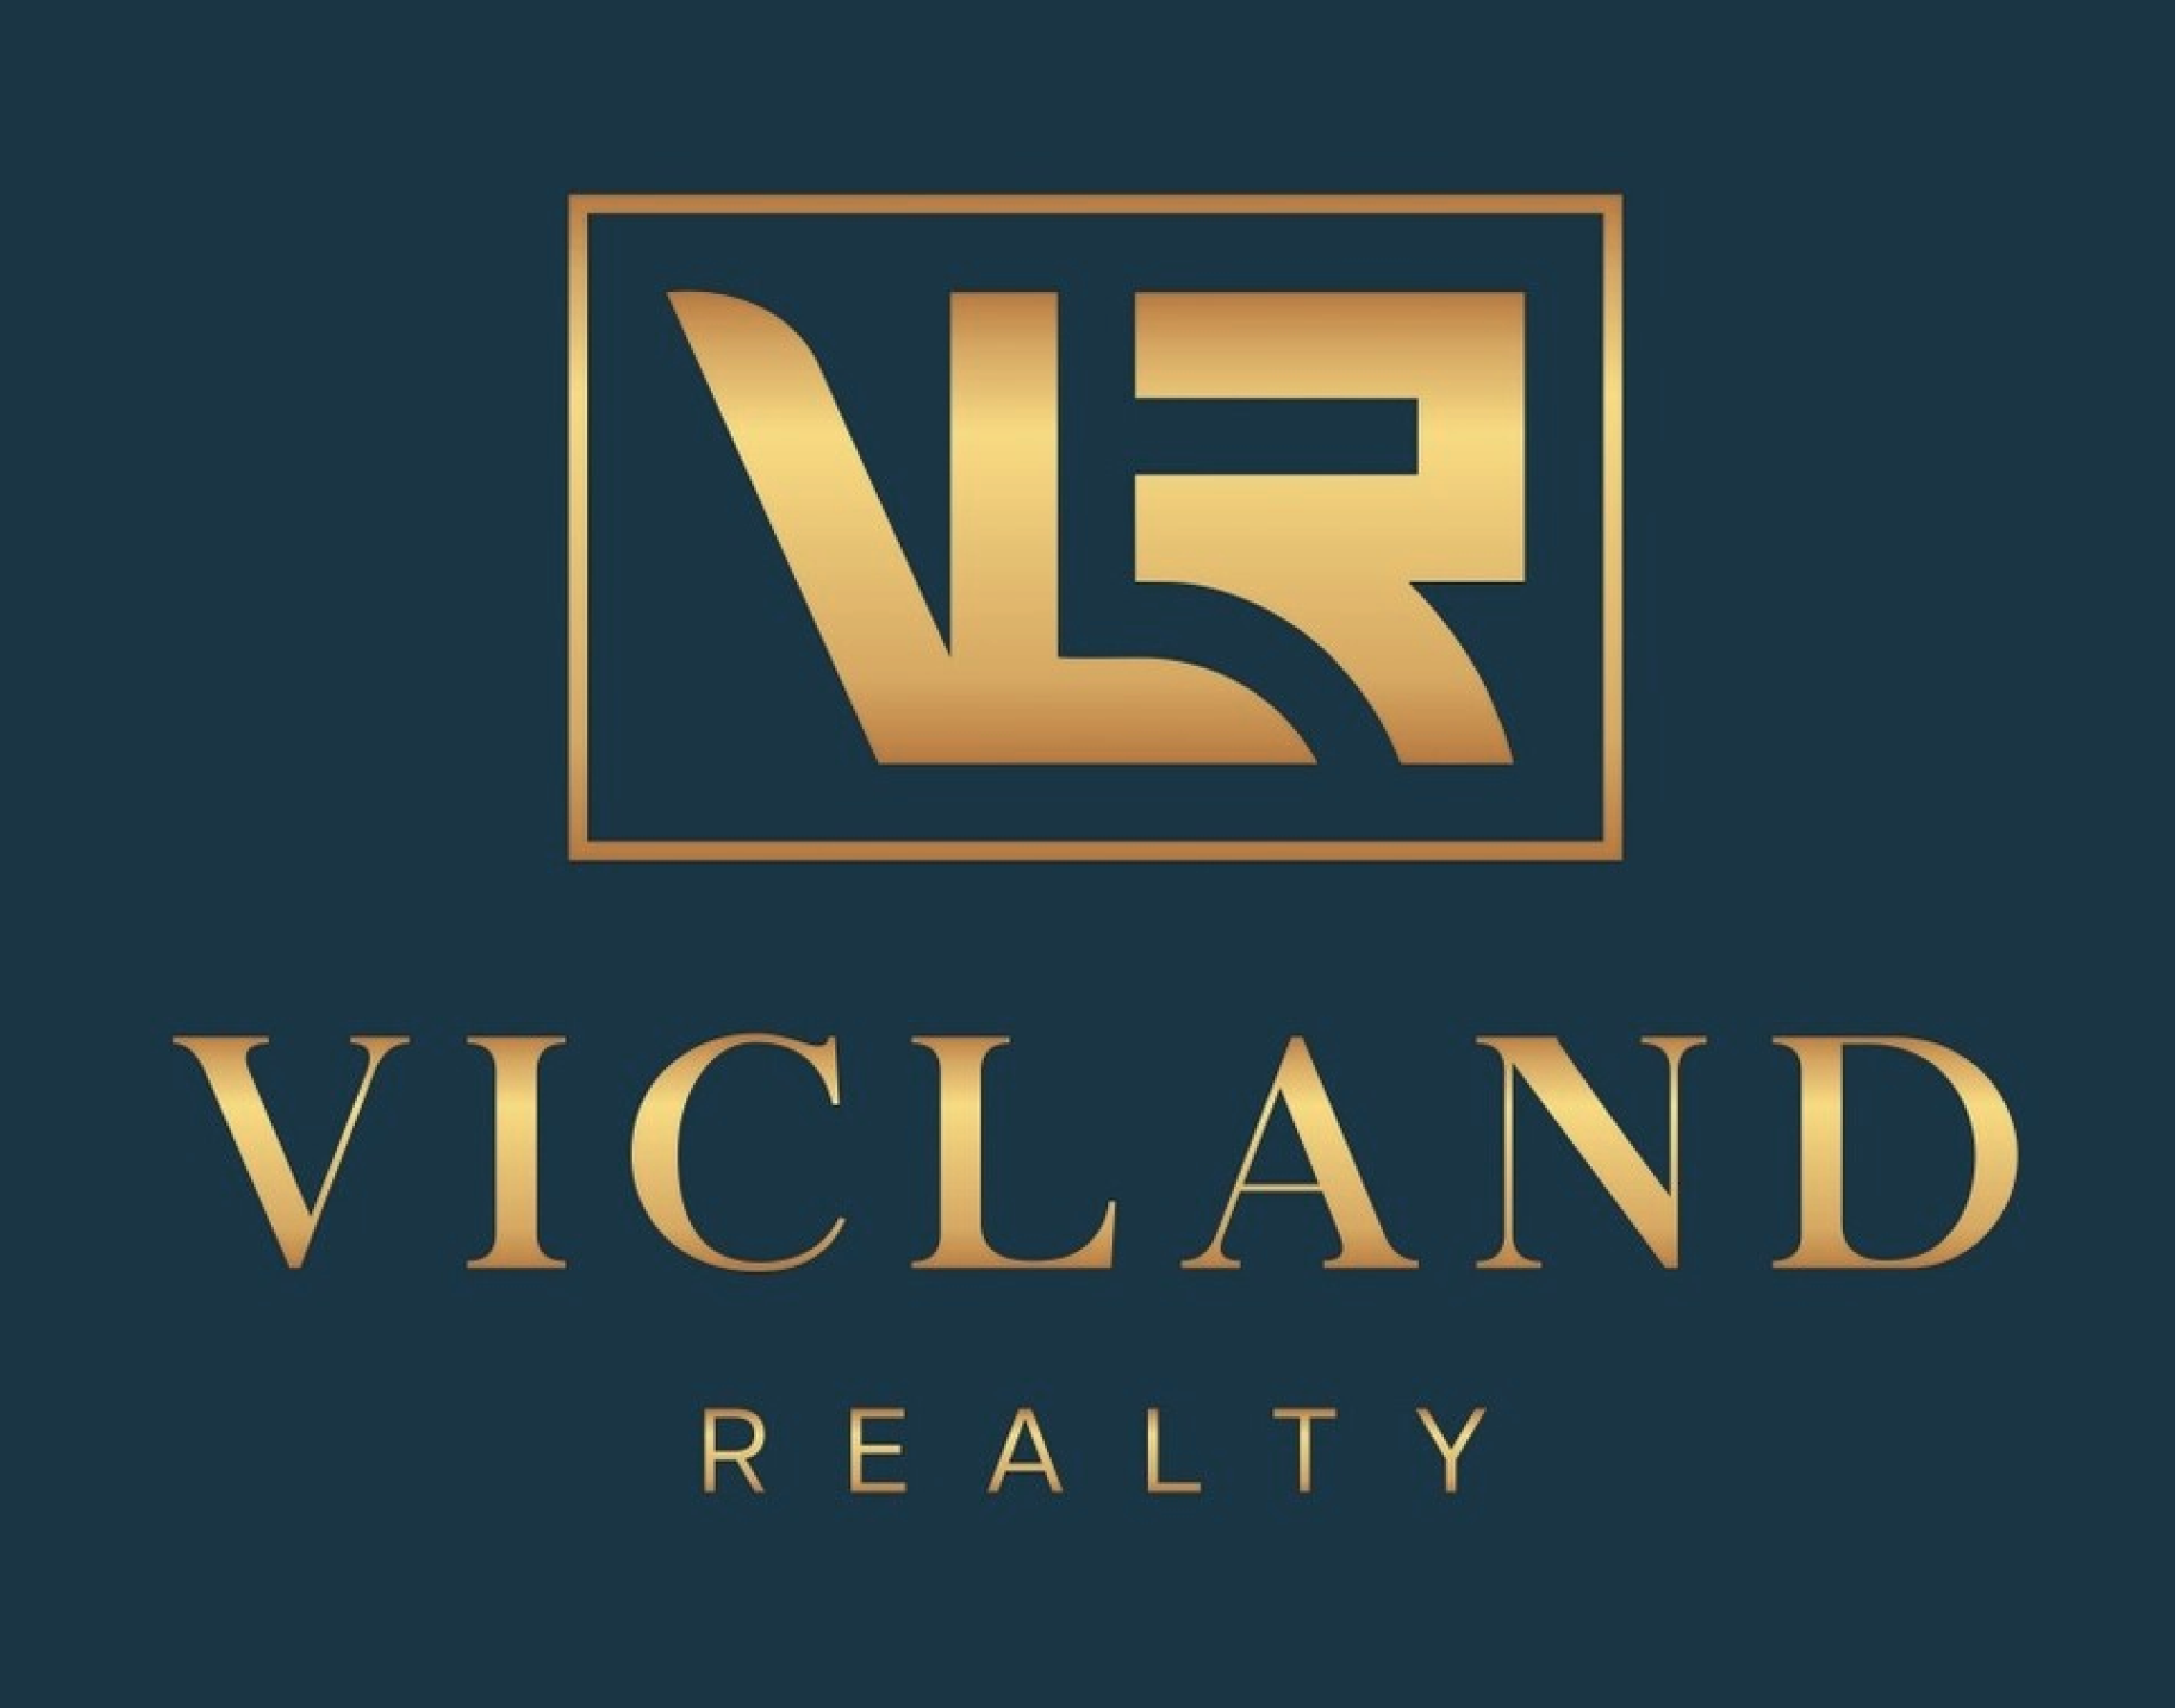 Vicland Reality - our premier sponsor